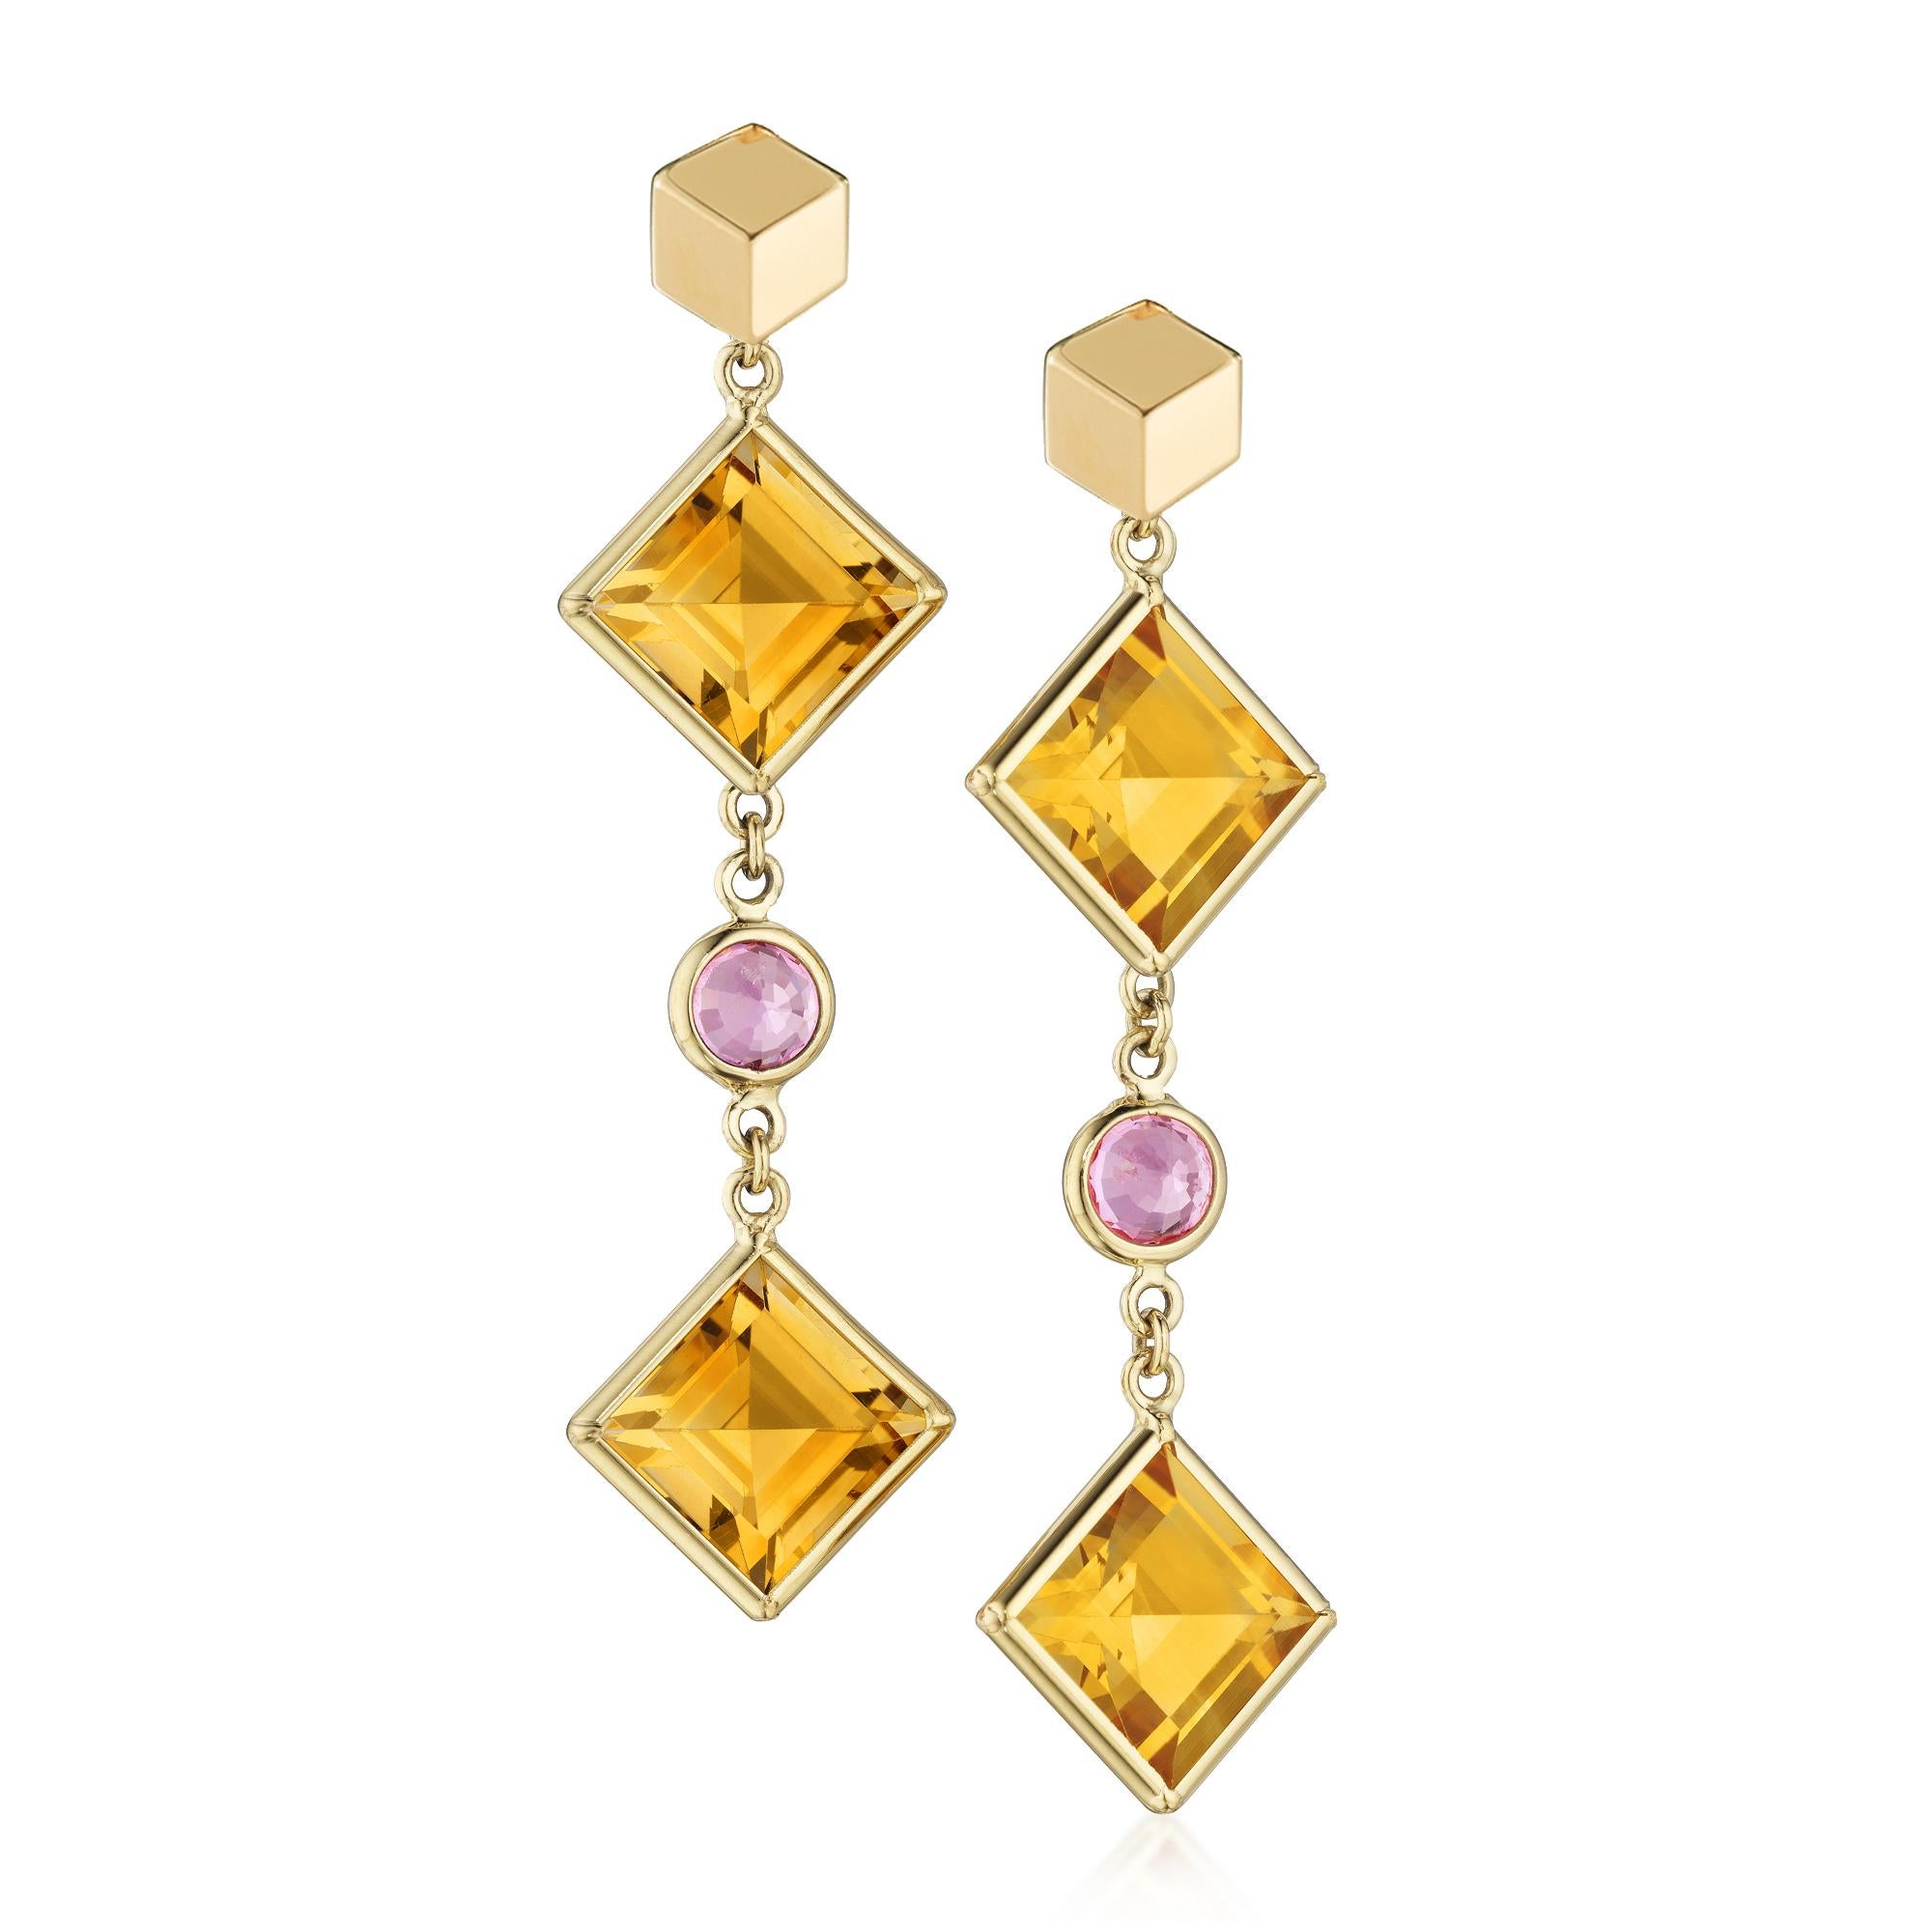 Contemporary Paolo Cosatgli 18 Karat Yellow Gold Citrine & Pink Sapphire Florentine Earrings For Sale